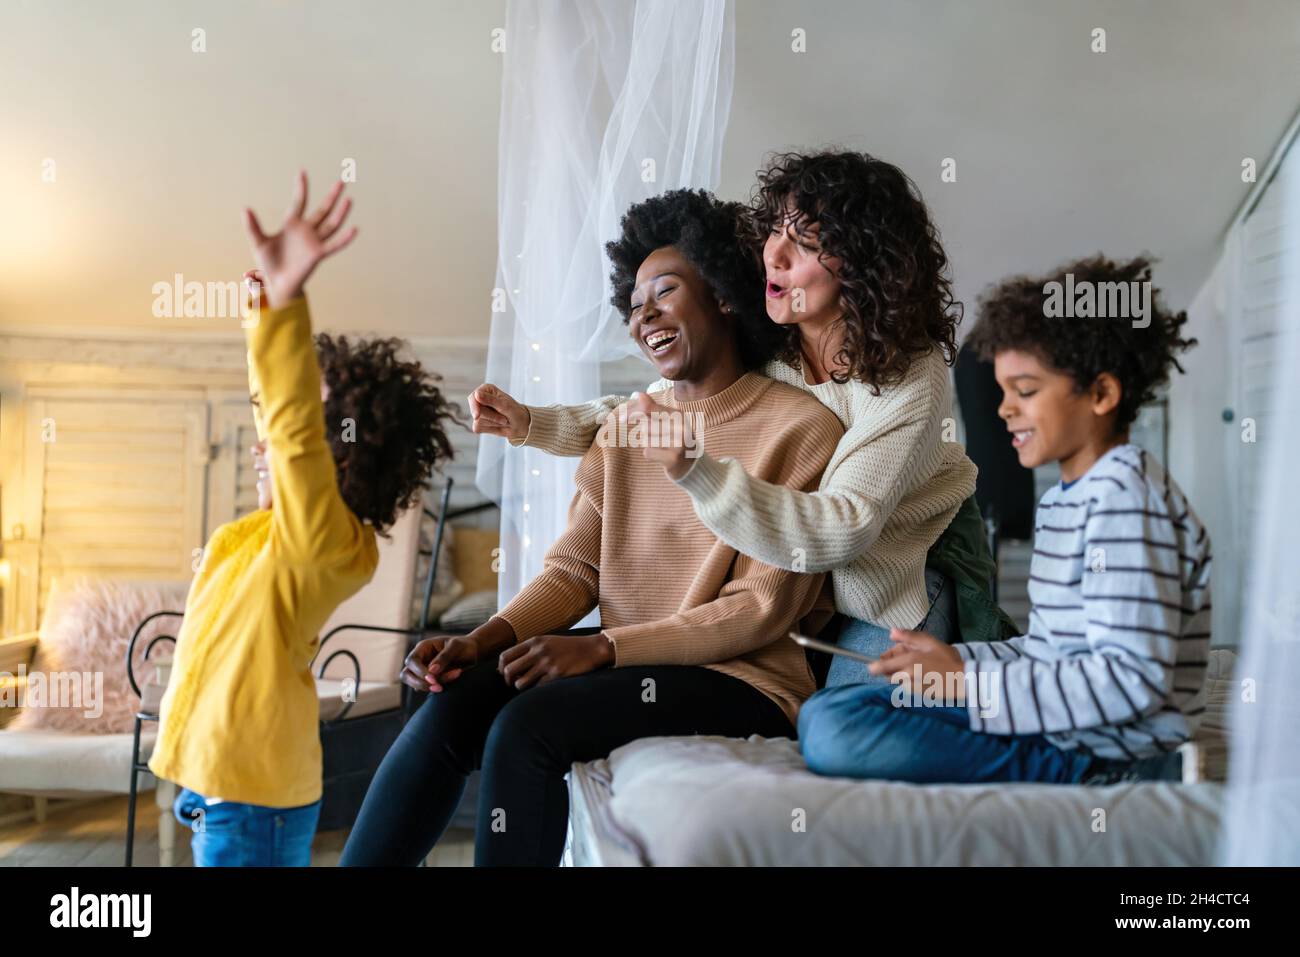 Happy lesbian multiethnic couple in love with childen at home. Family lgbt child happiness concept Stock Photo